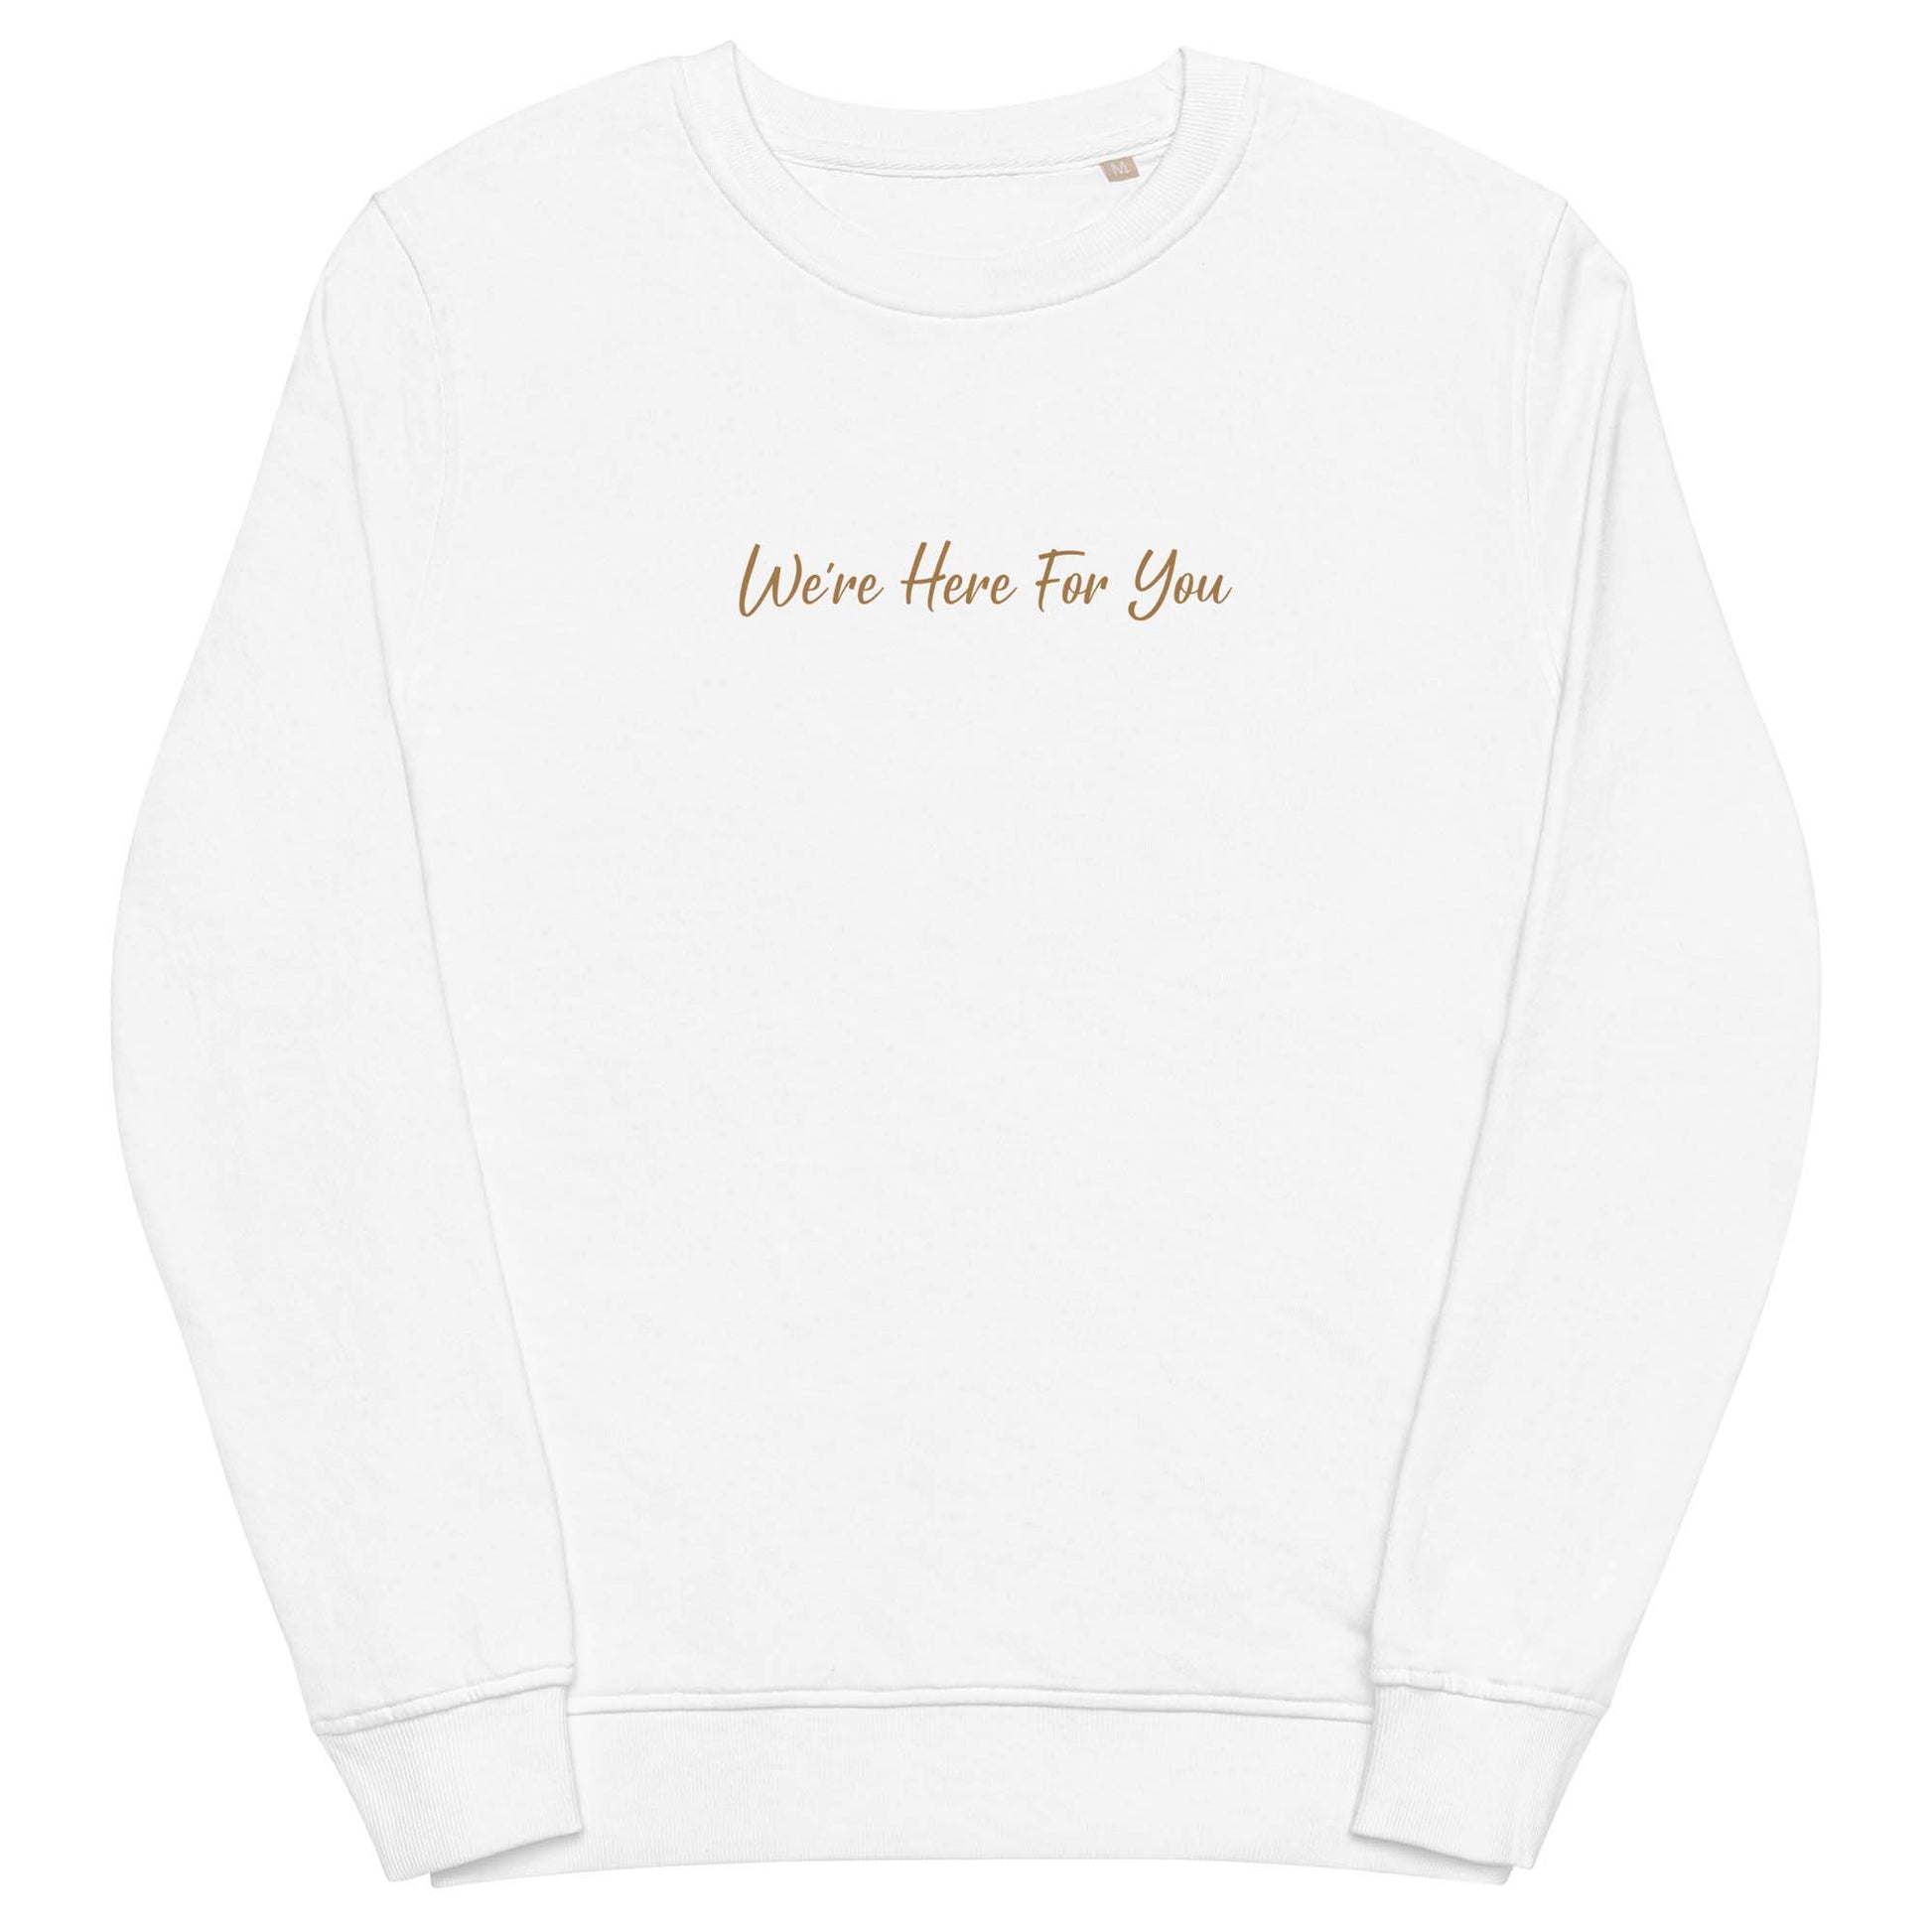 Men white sustainable sweatshirt with inspirational quote, "We Are Here For You."